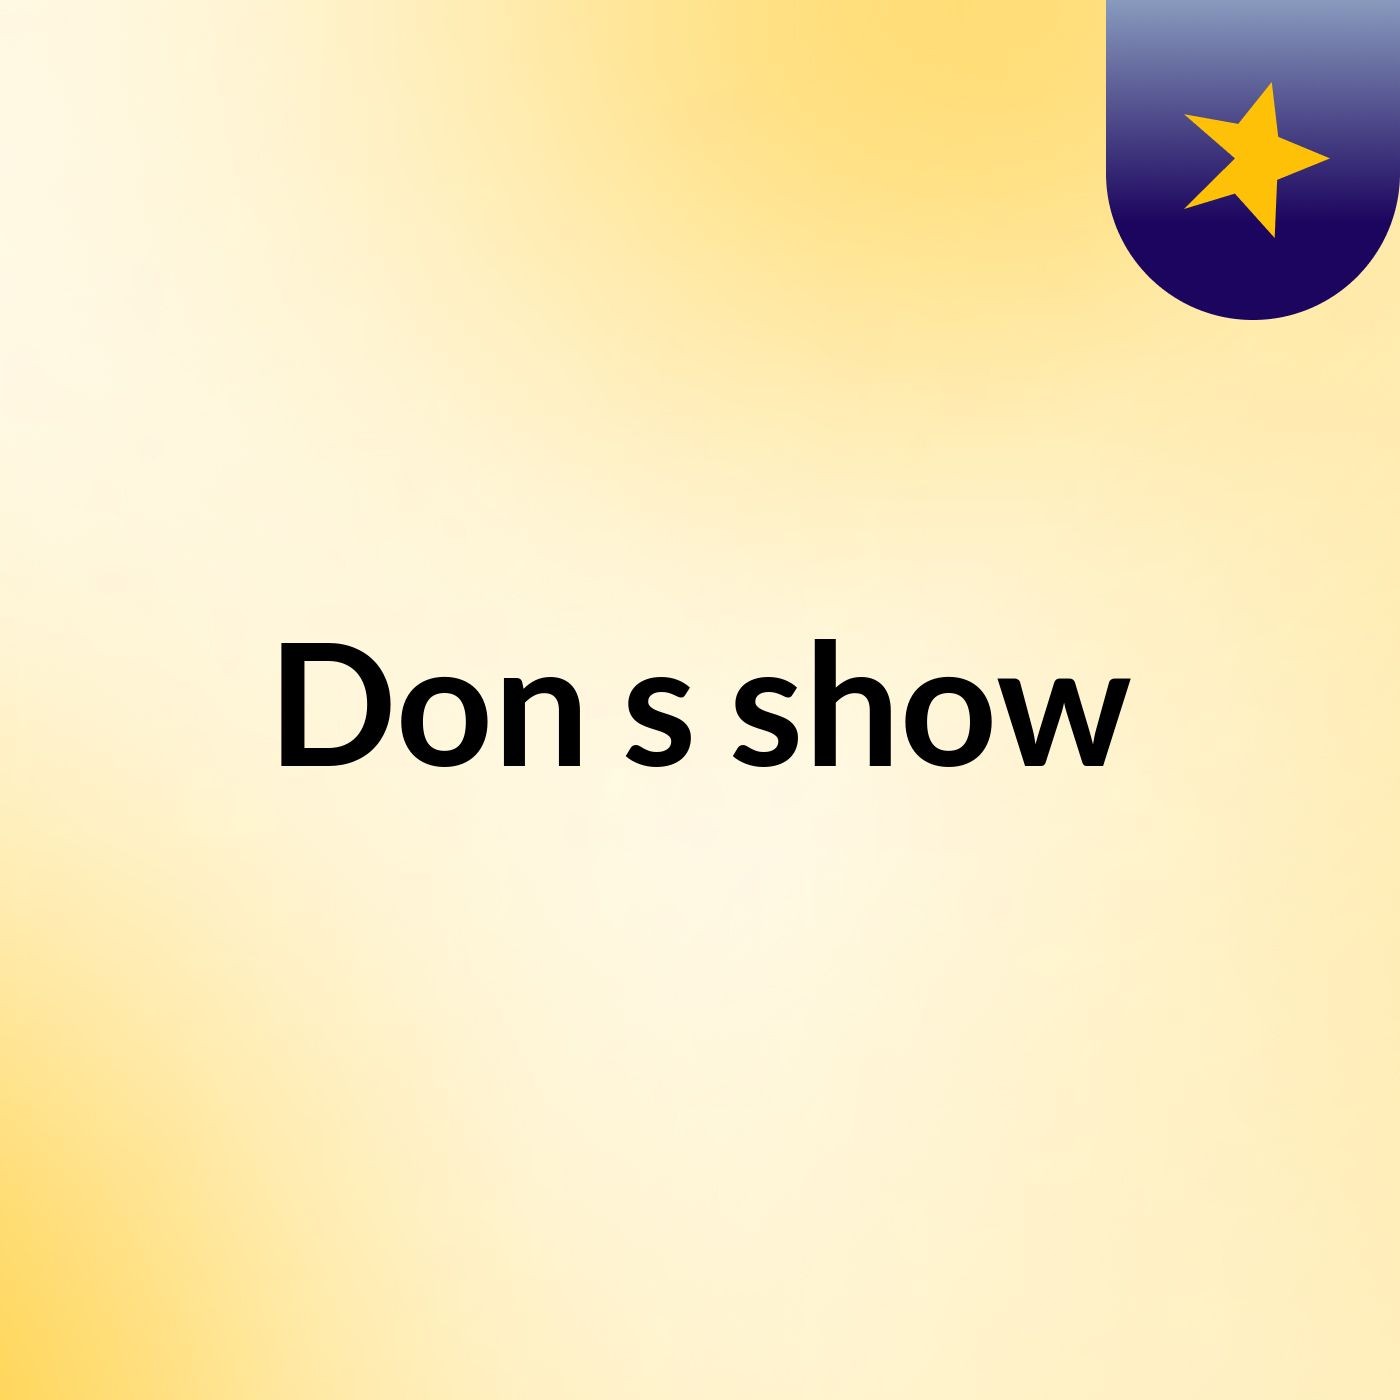 Don's show